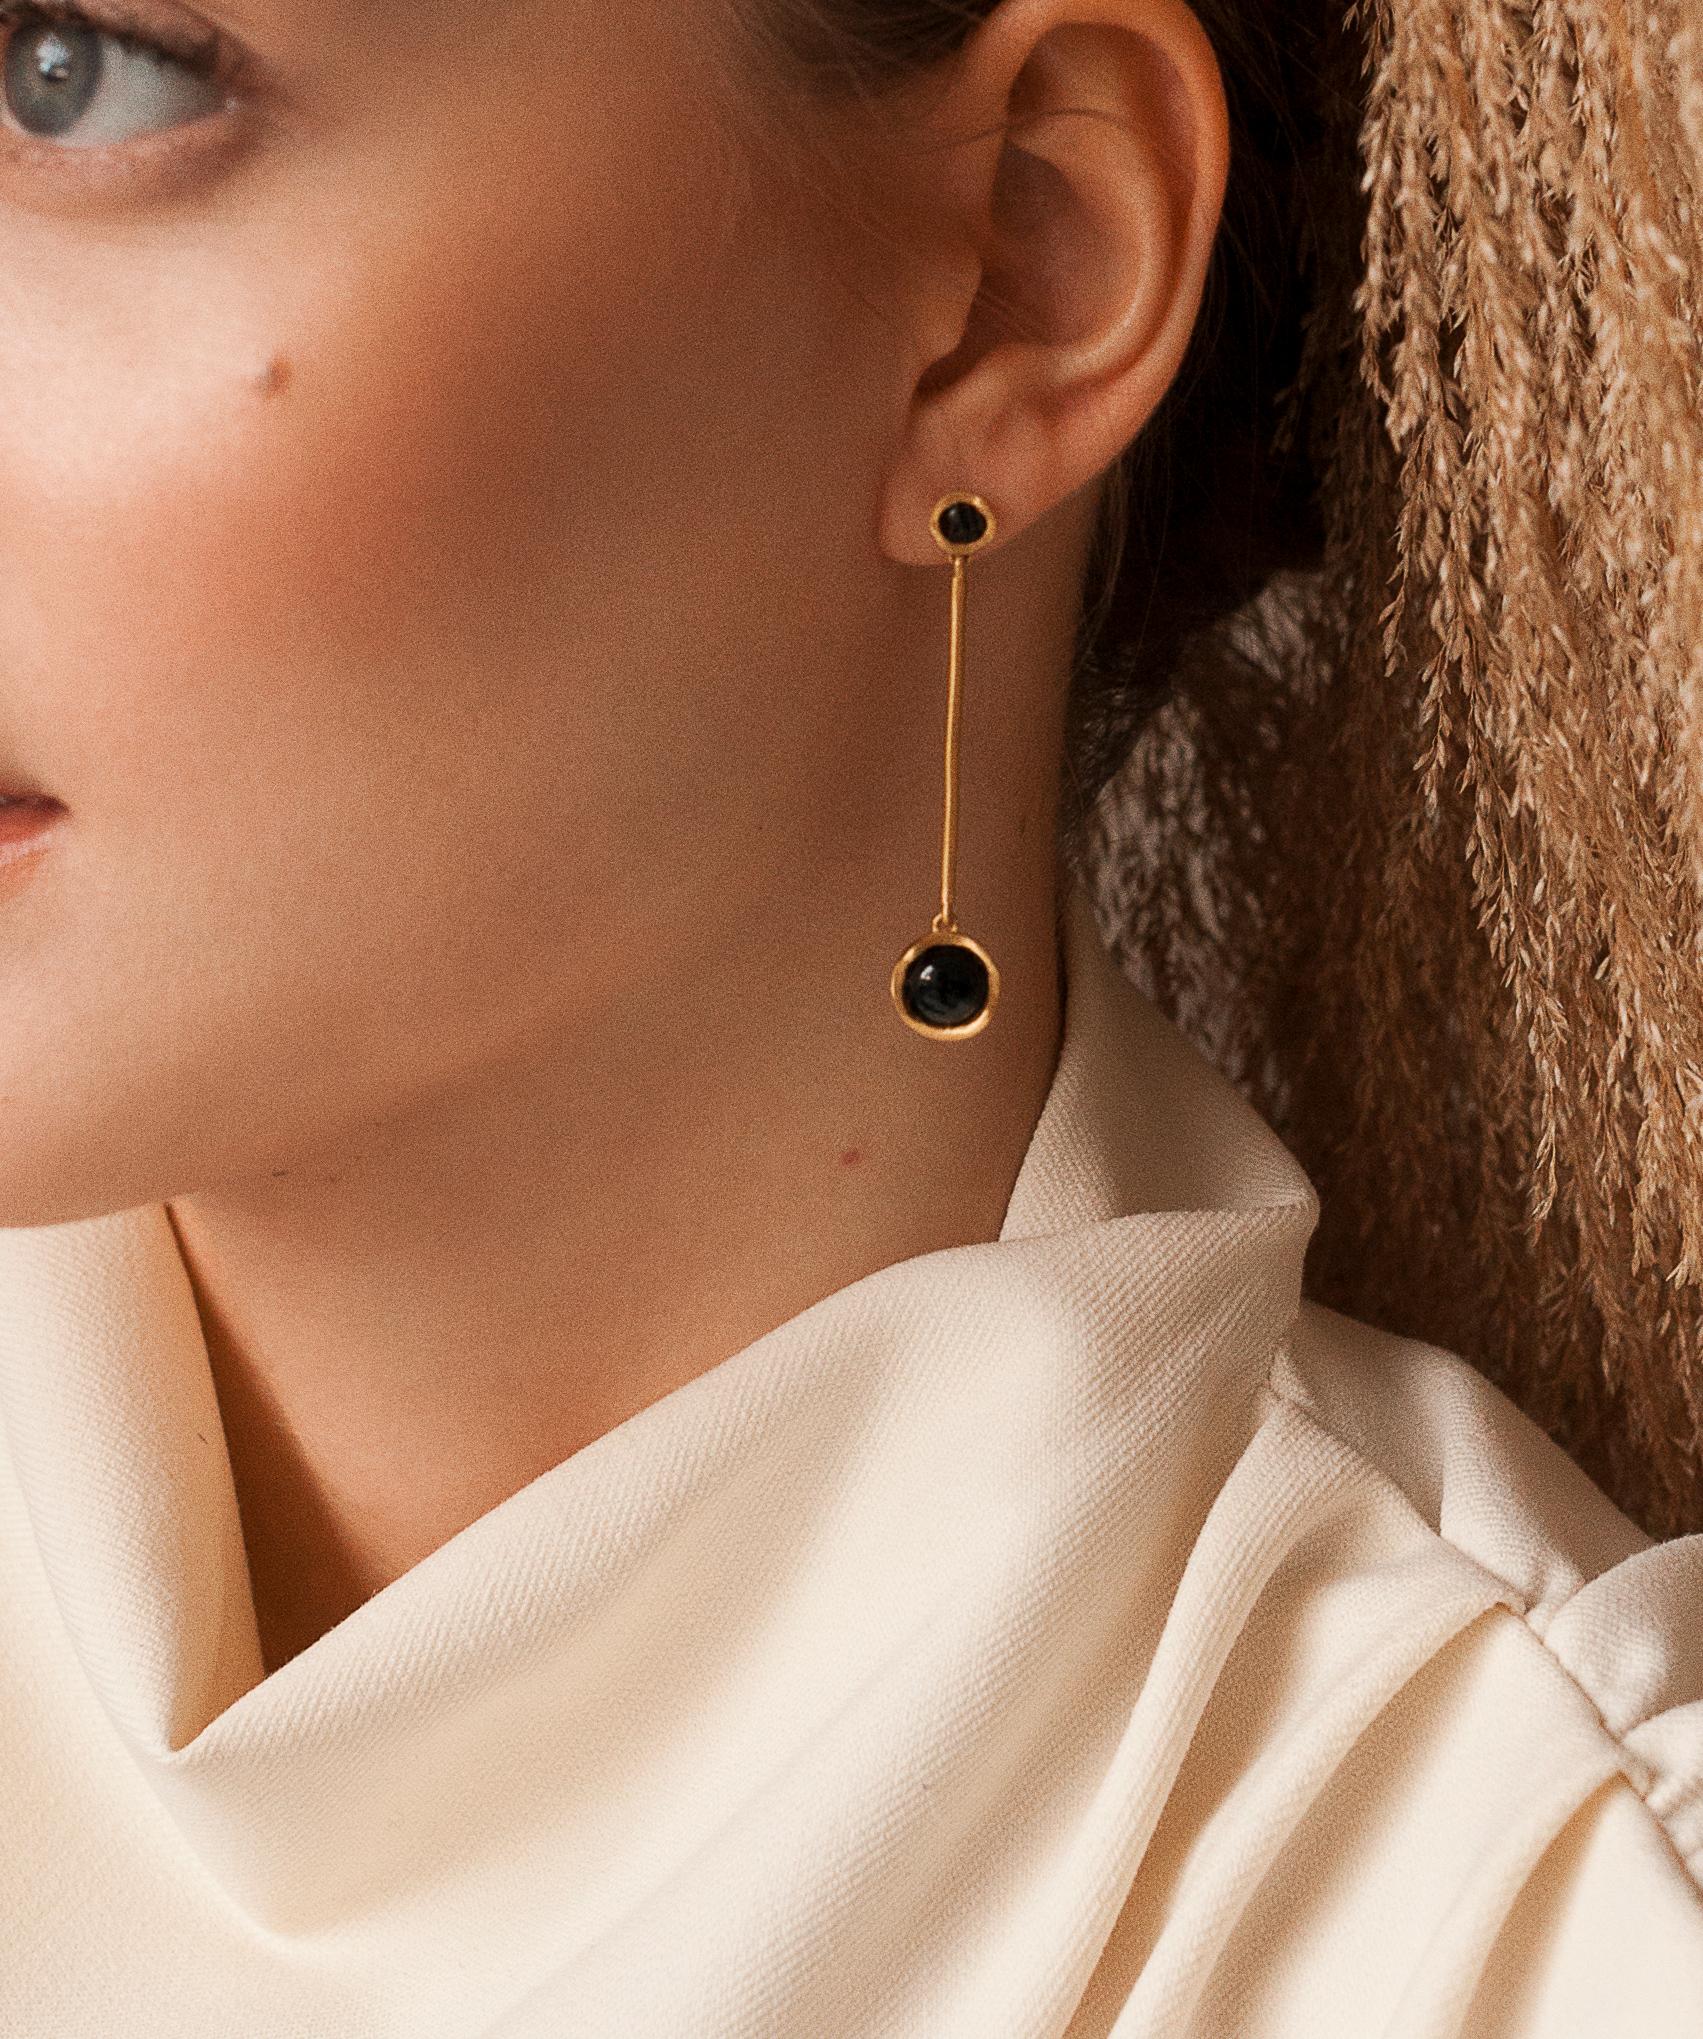 Handcrafted in brass and gold dipped in 22k gold our Parallel earrings are part of Cyntia Miglio's 